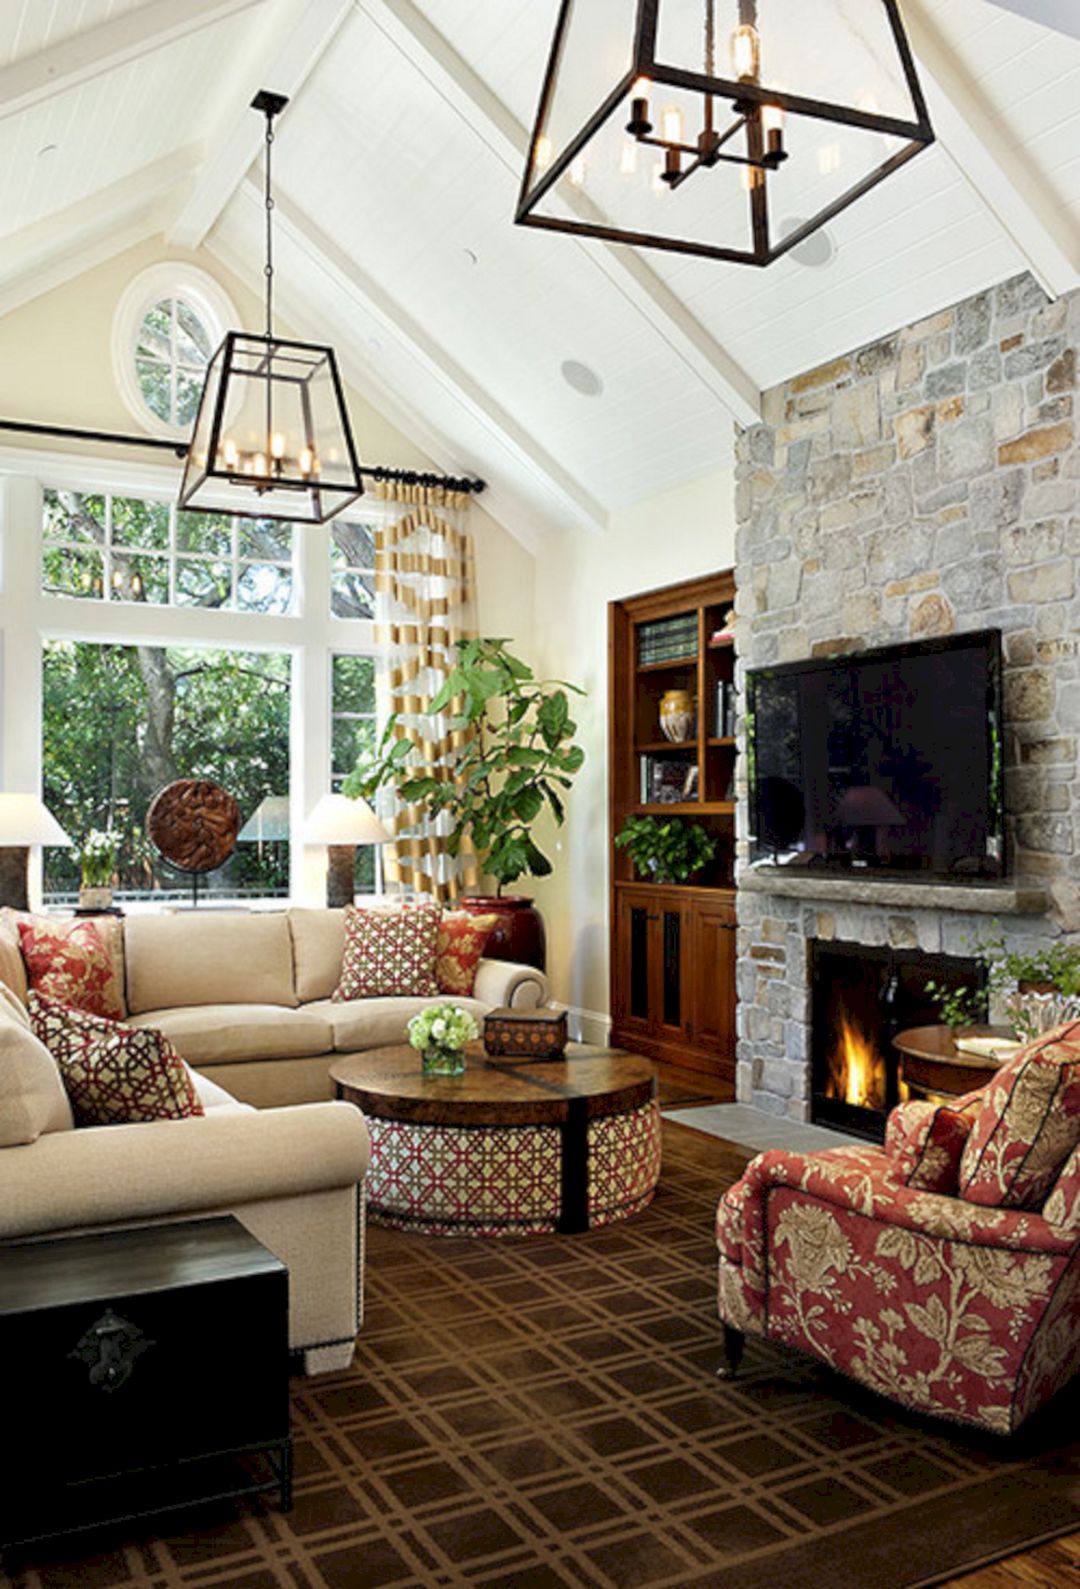 Living Room With Fireplace And Vaulted Ceiling (Living ...